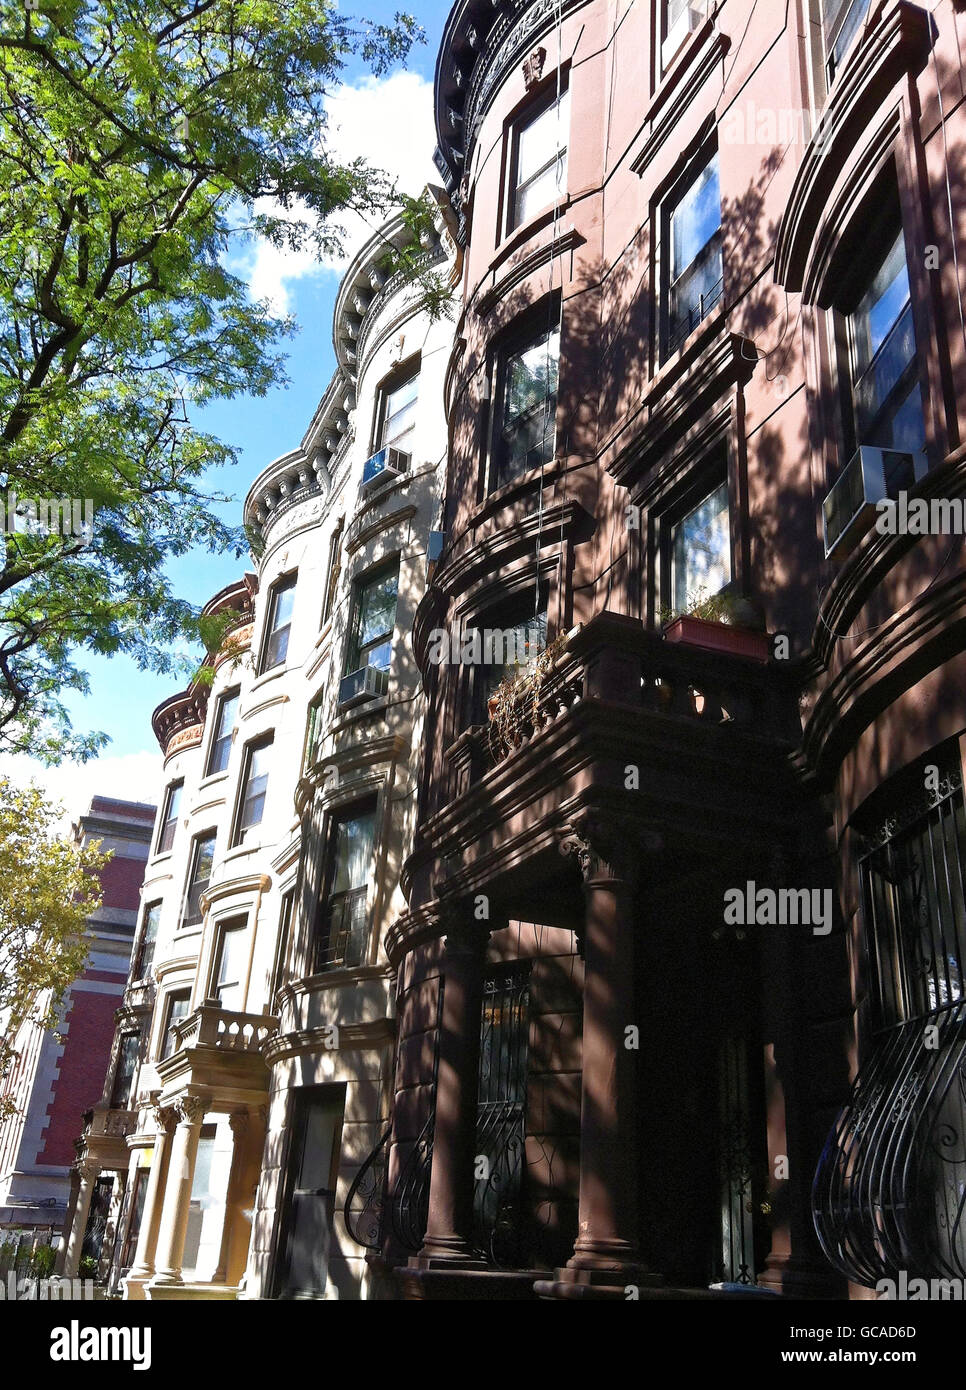 Brownstones and limestone classic architecture in Brooklyn, New York. Stock Photo